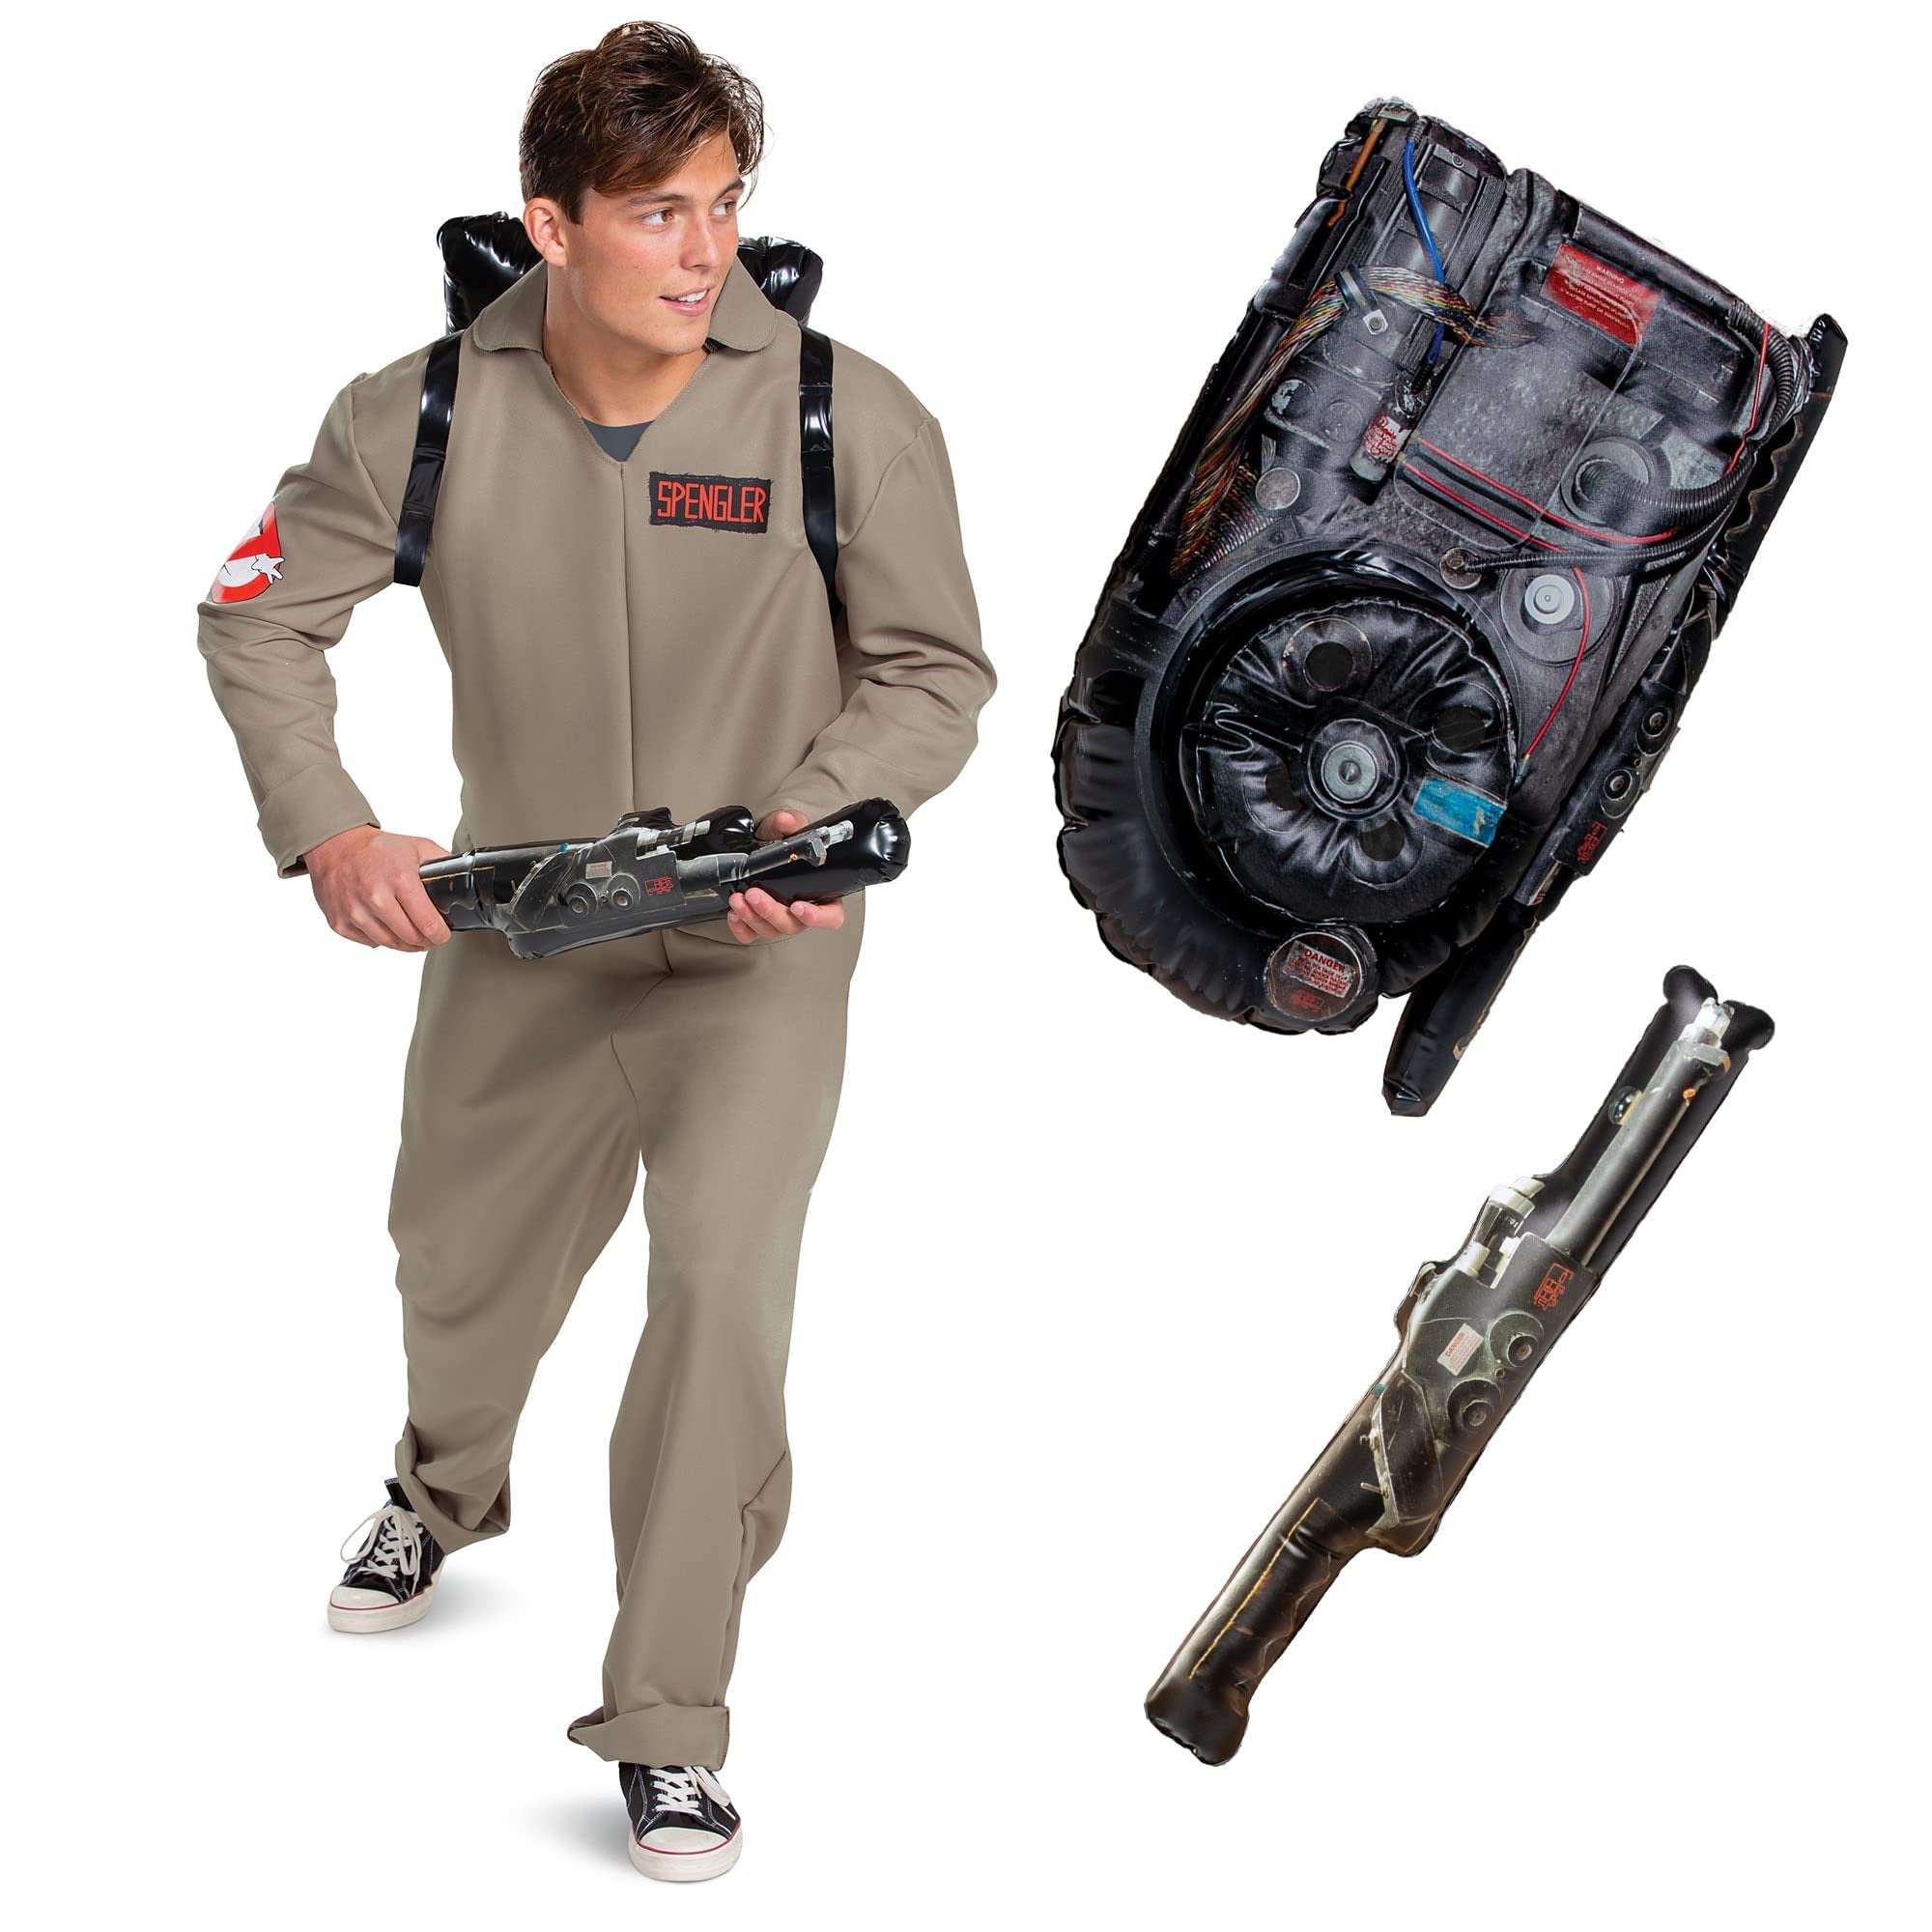 Disguise Adults, Official Ghostbusters Afterlife Movie Costume Jumpsuit with Inflatable Proton Pack, Multicolored, Medium (38-40)